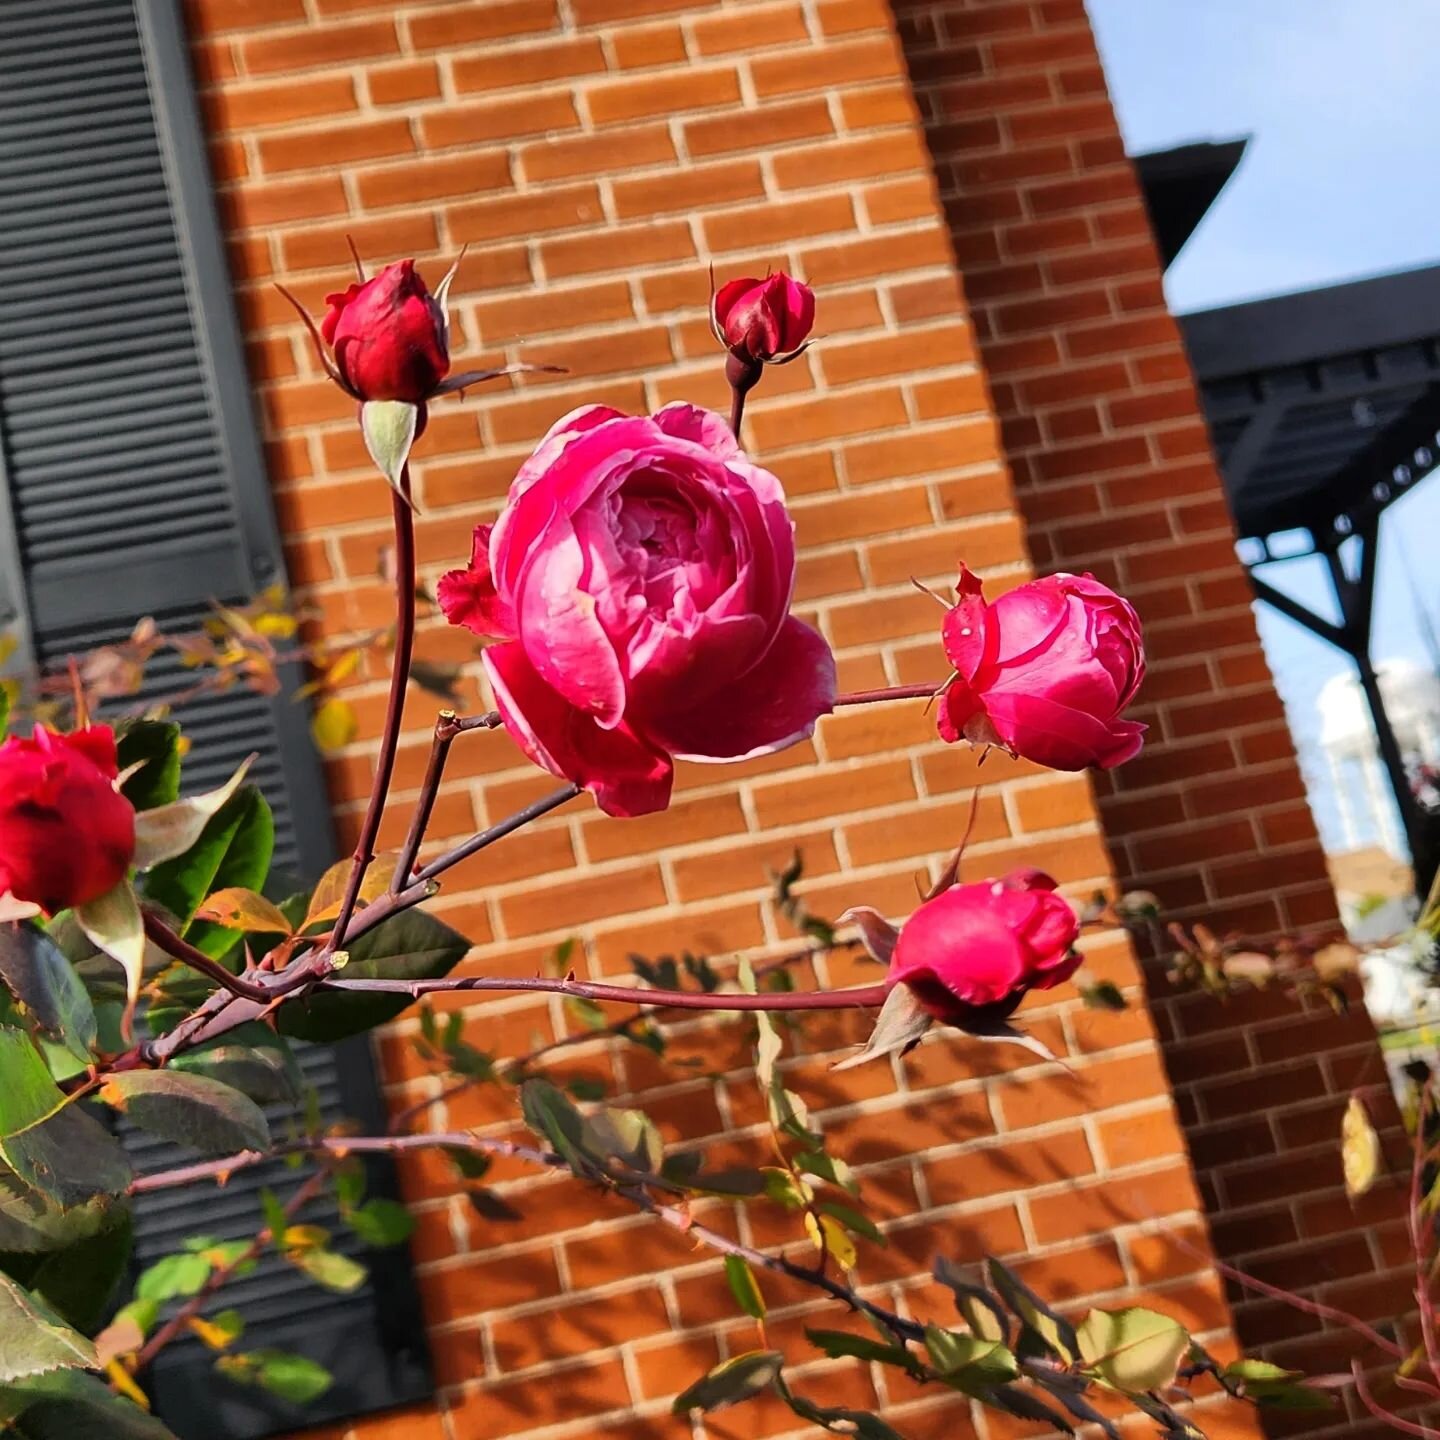 It may be November, but the roses are in full bloom @theredbricksuites ... enjoy it while it lasts! It is the perfect time for a fall getaway.